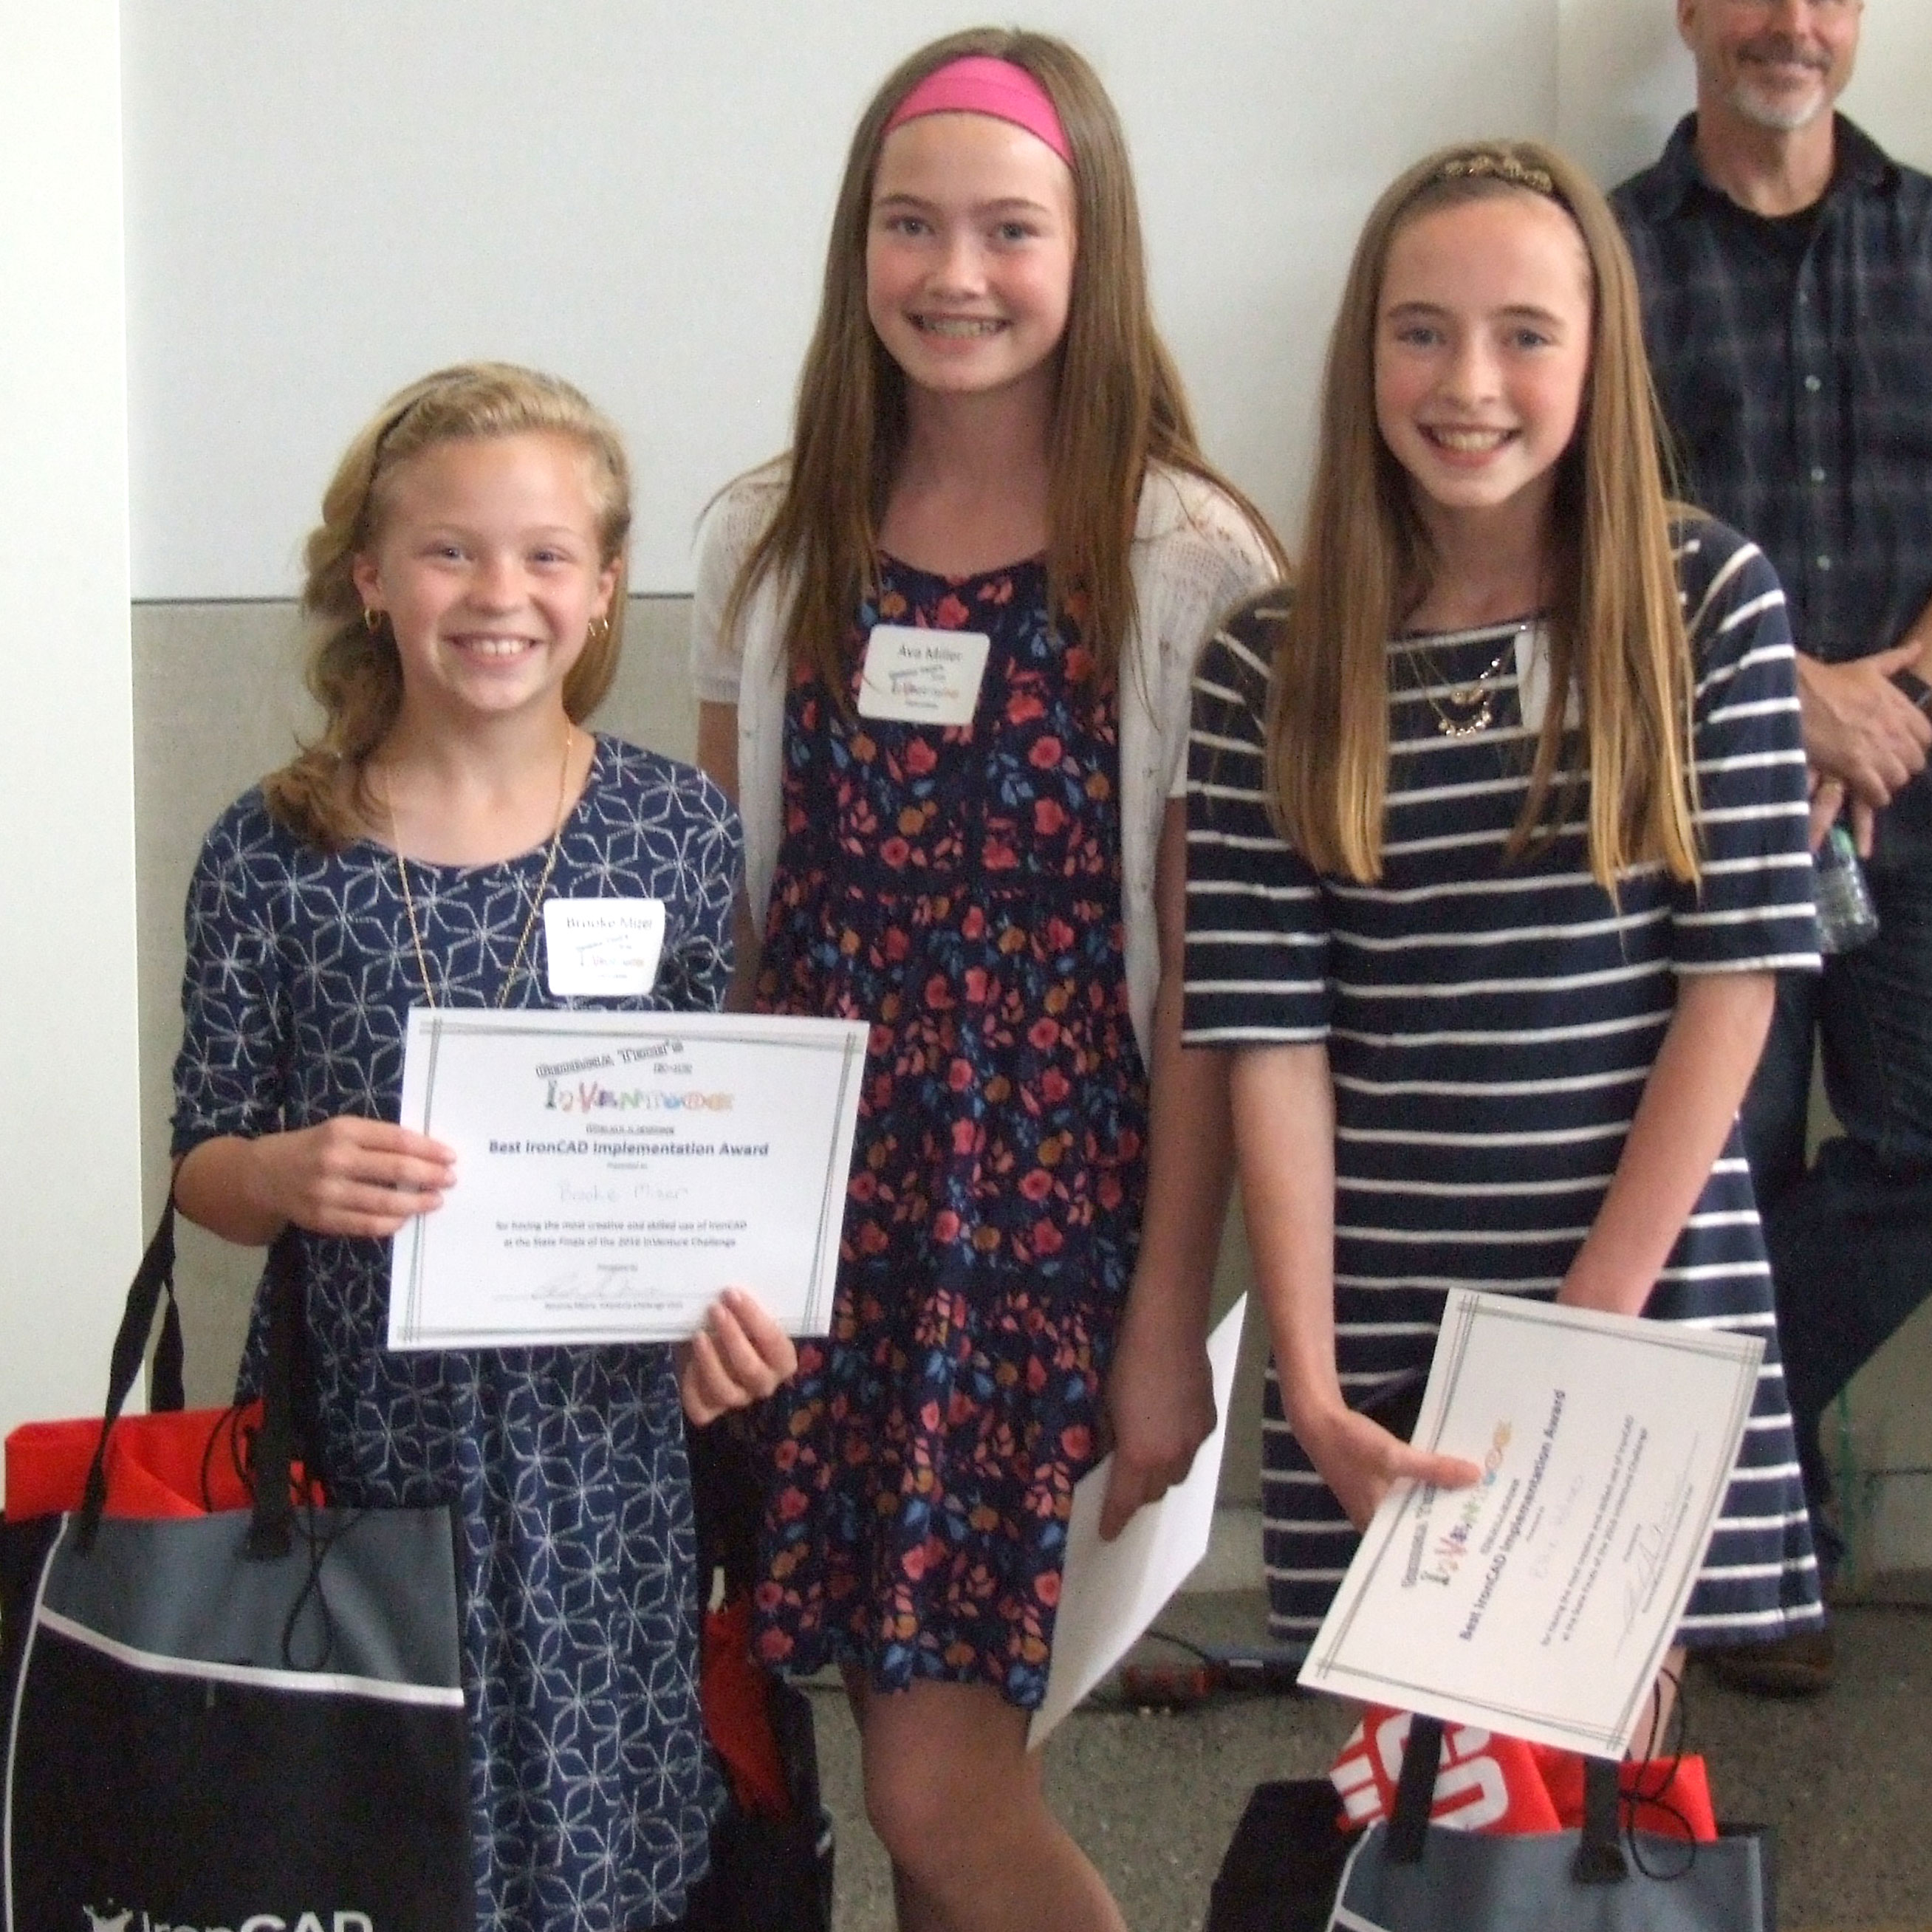 Three smiling students holding certificates